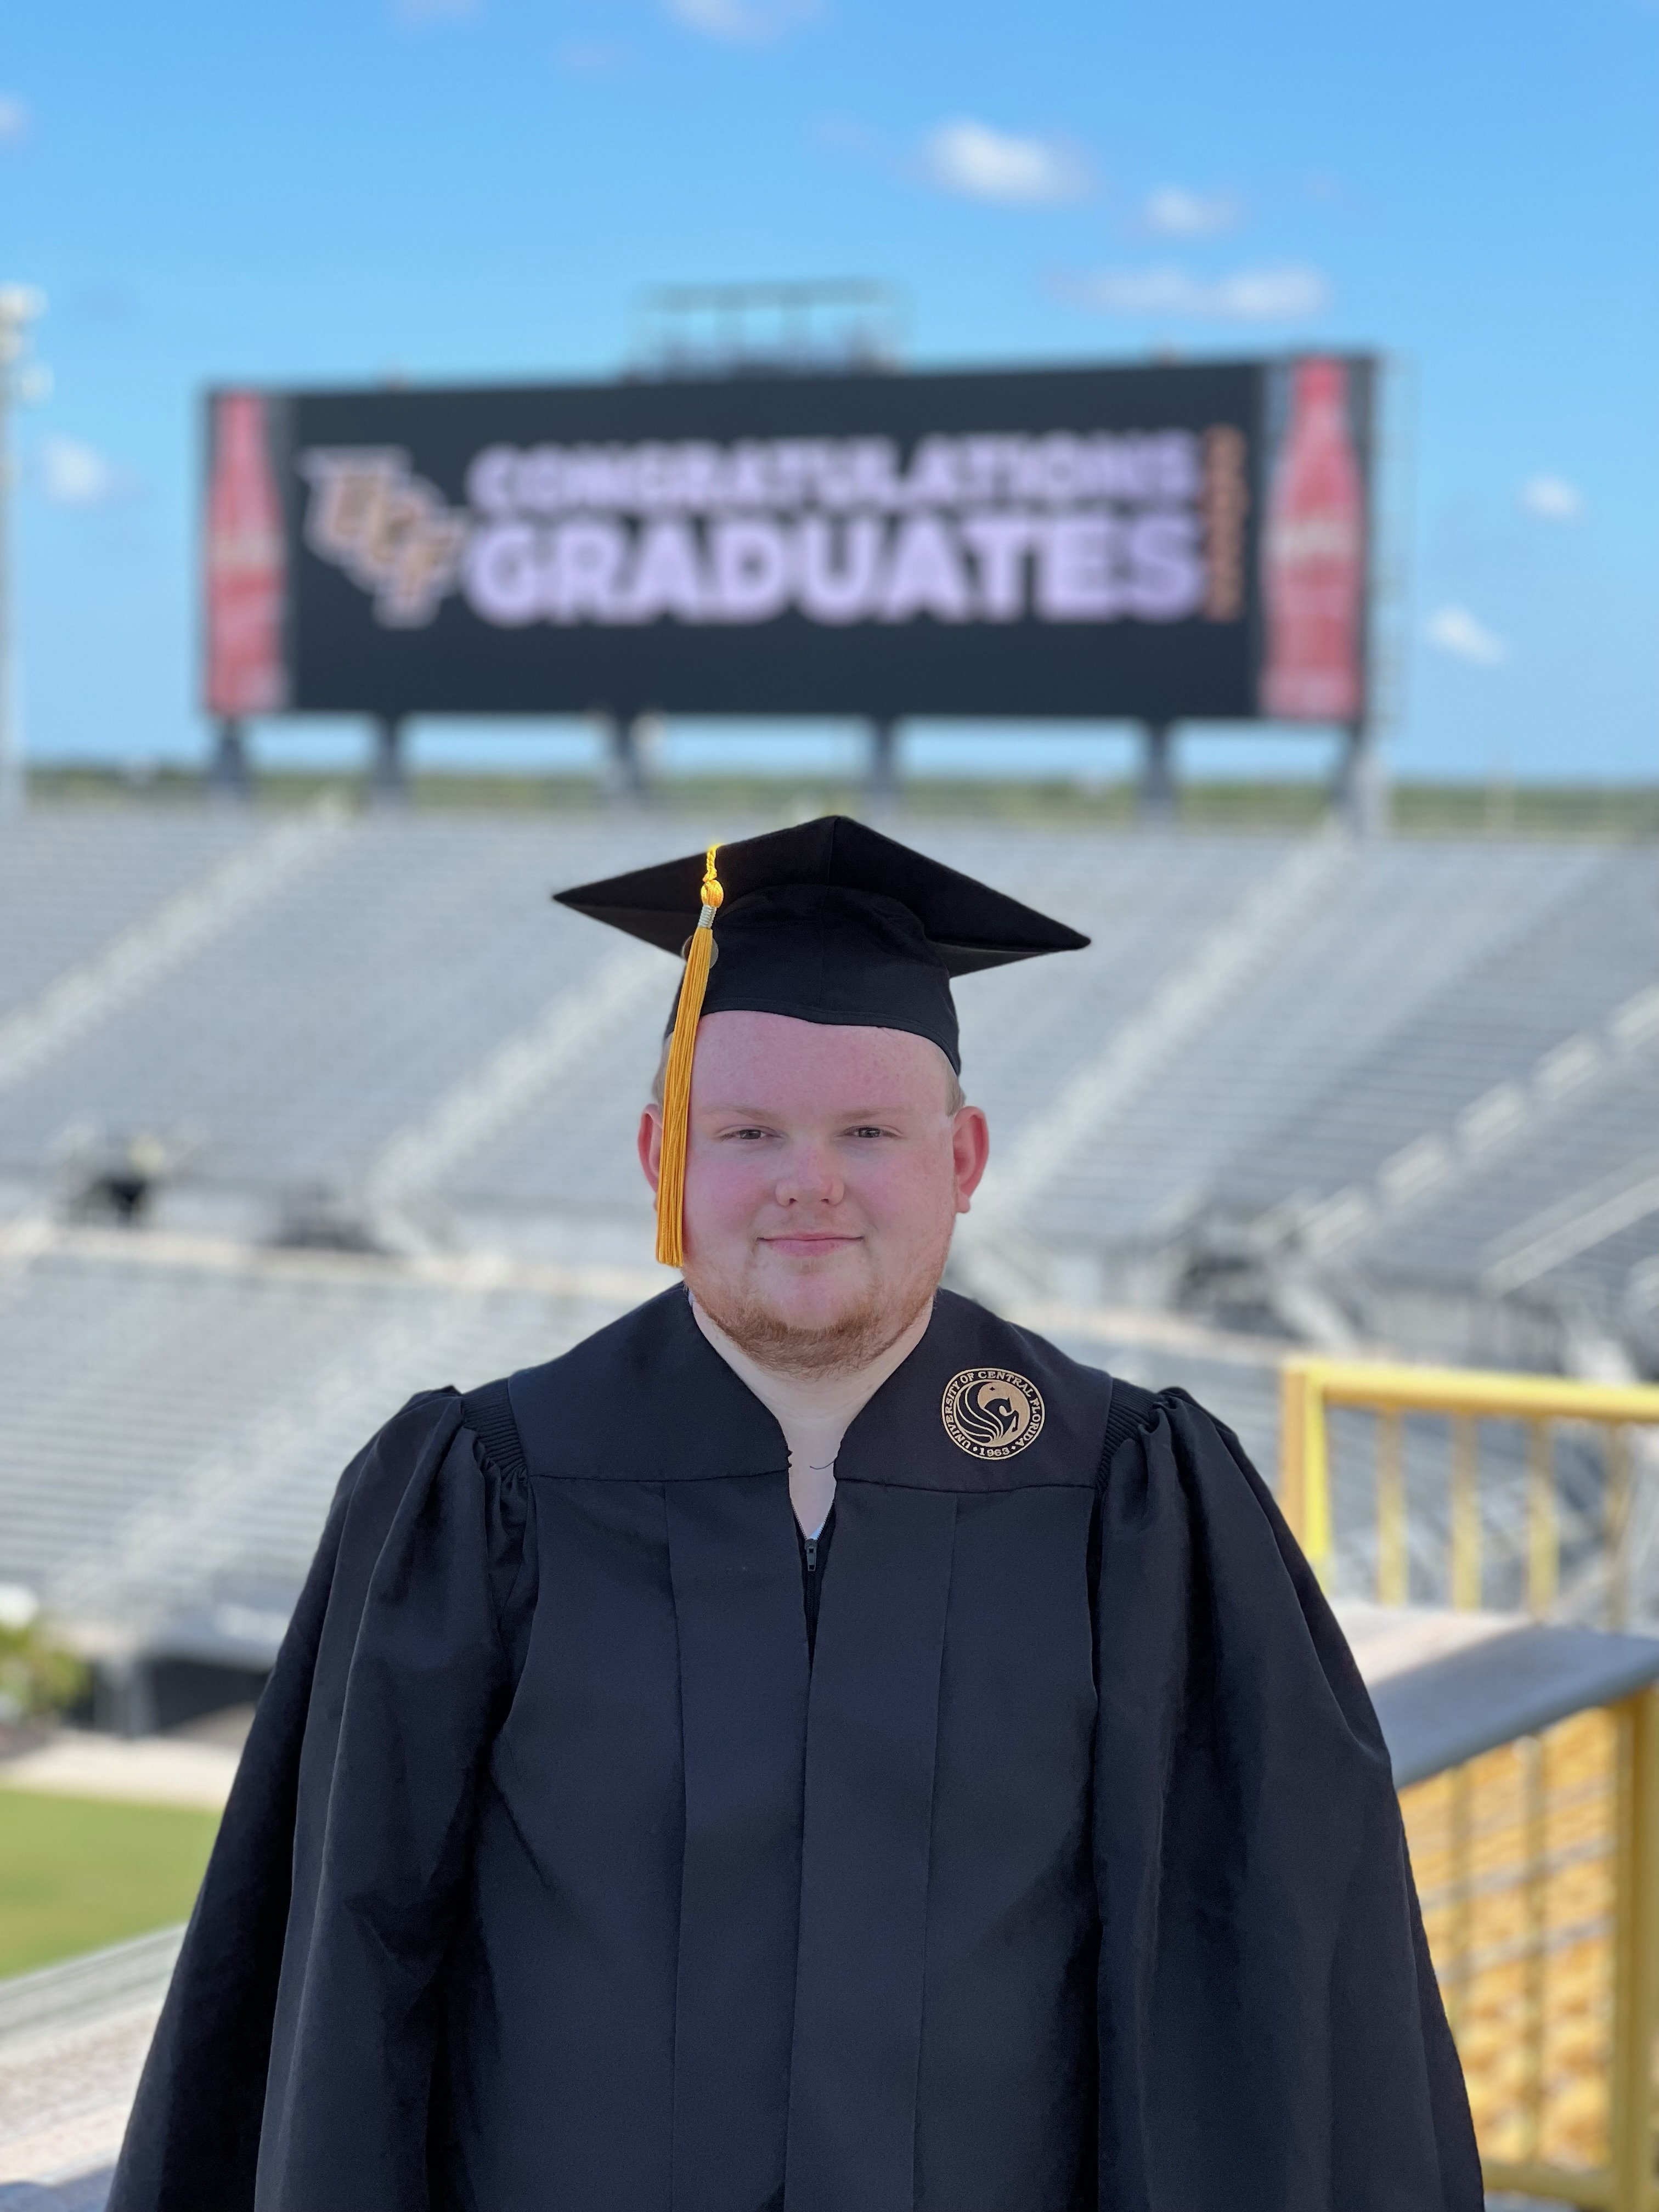 Picture of Dylan Krueger in graduation cap and gown at University of Central Florida.